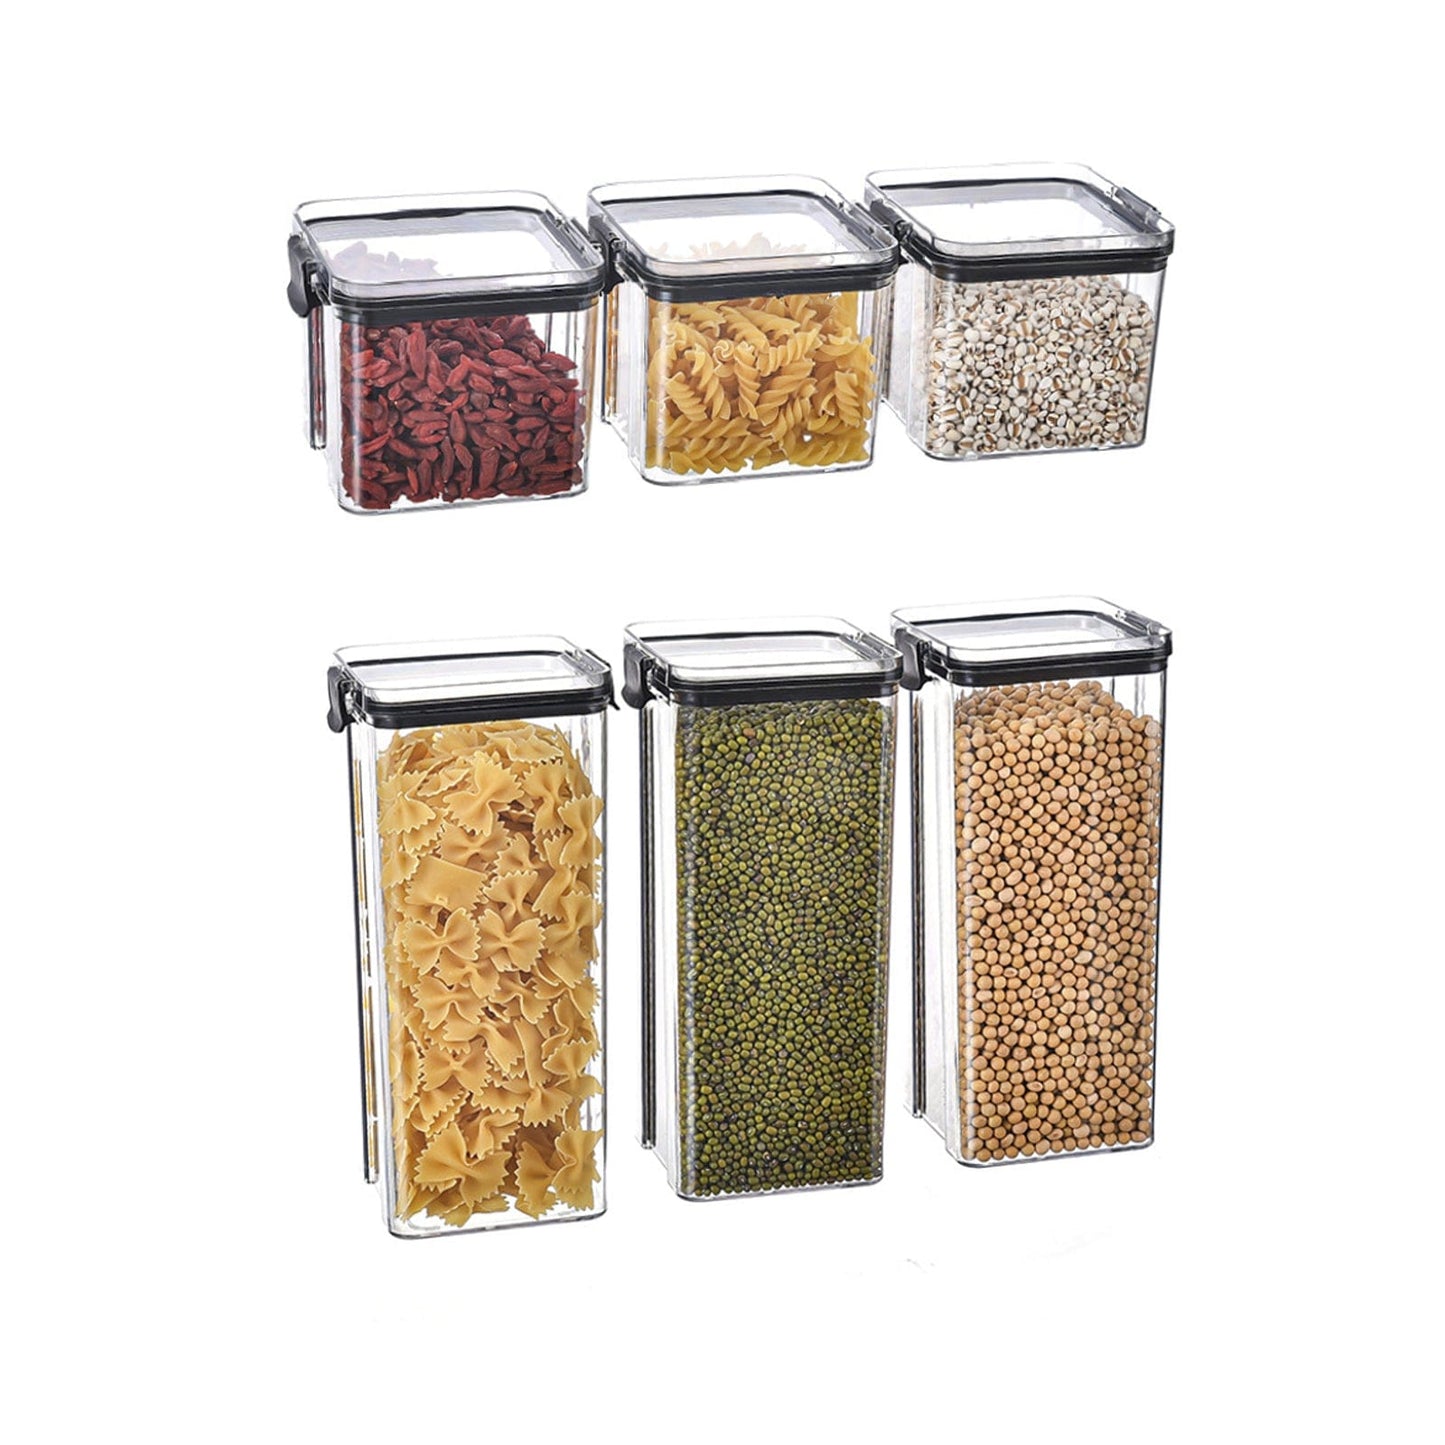 【LA000268】6-Piece Pop Container Set for Food and Spices